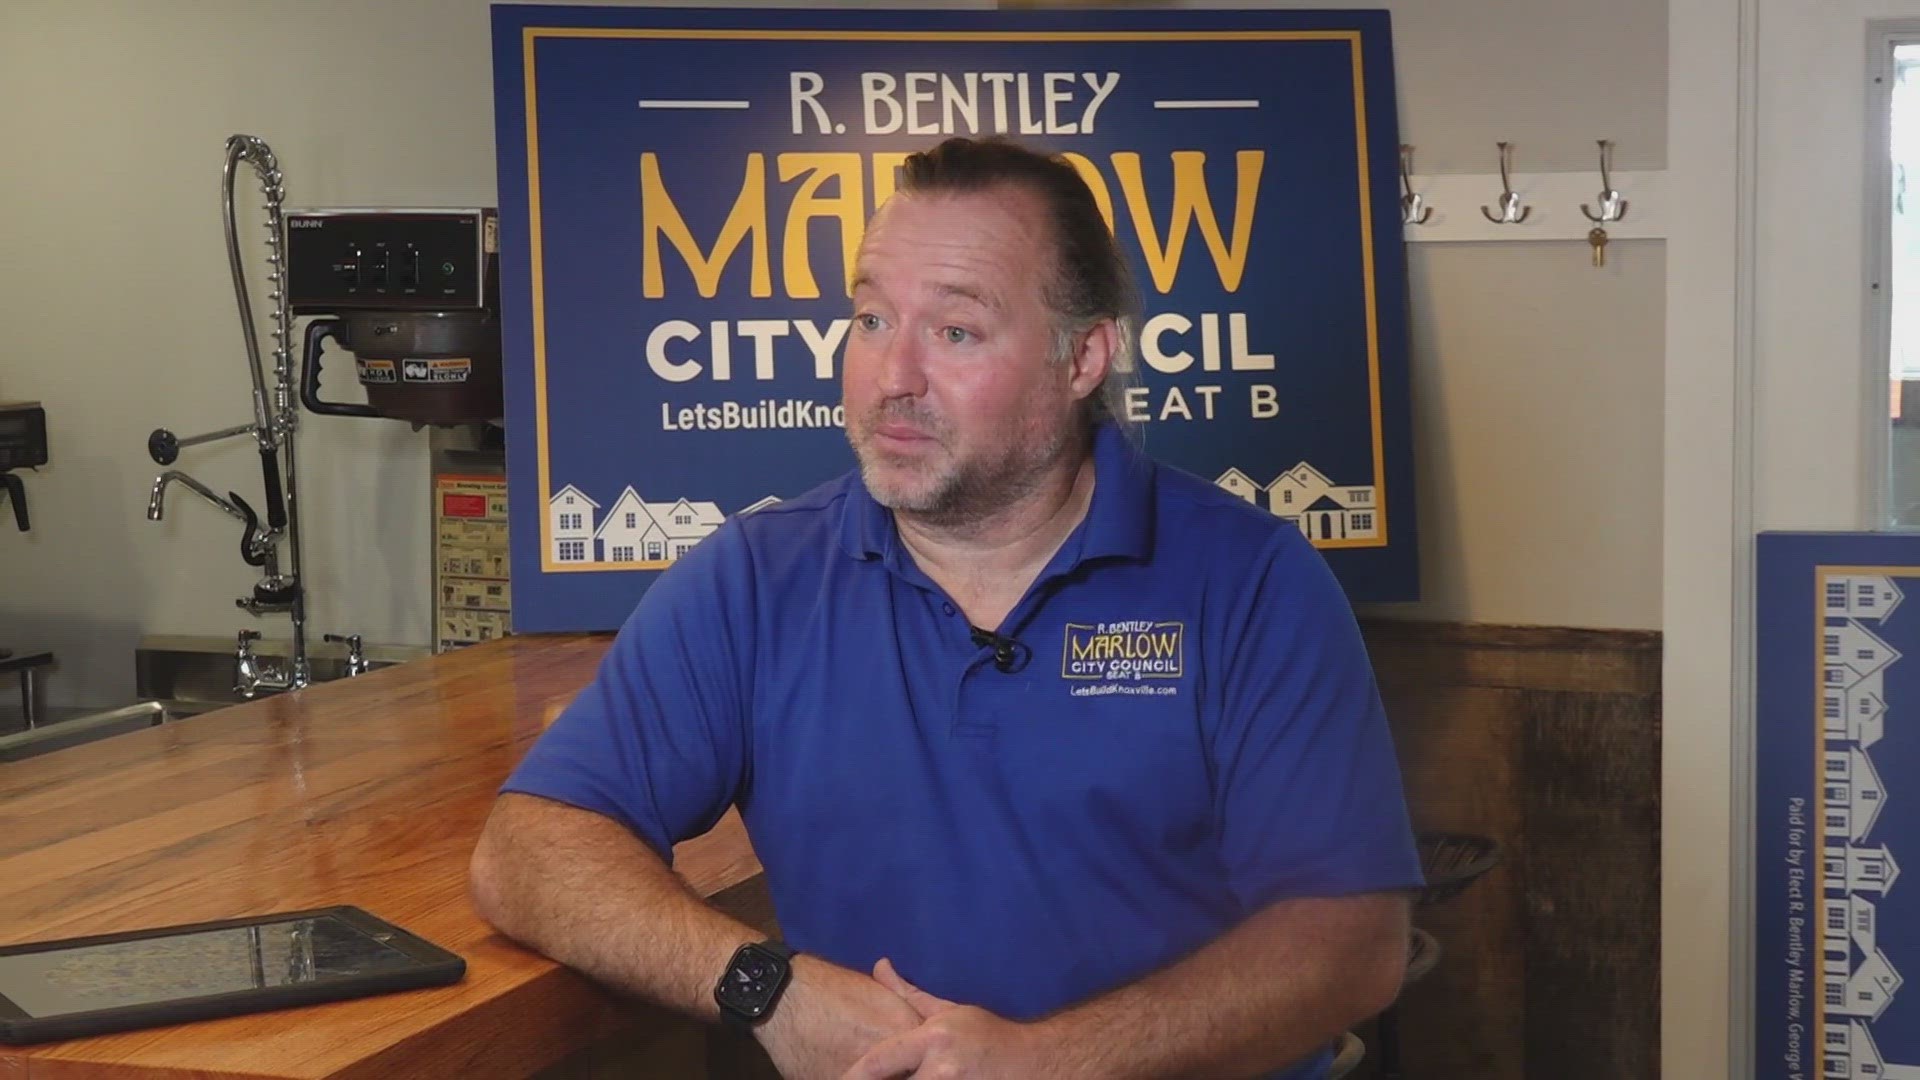 R. Bentley Marlow called the homeless "rabid animals" and said they should be "euthanized" on Facebook. He is running for Knoxville City Council.